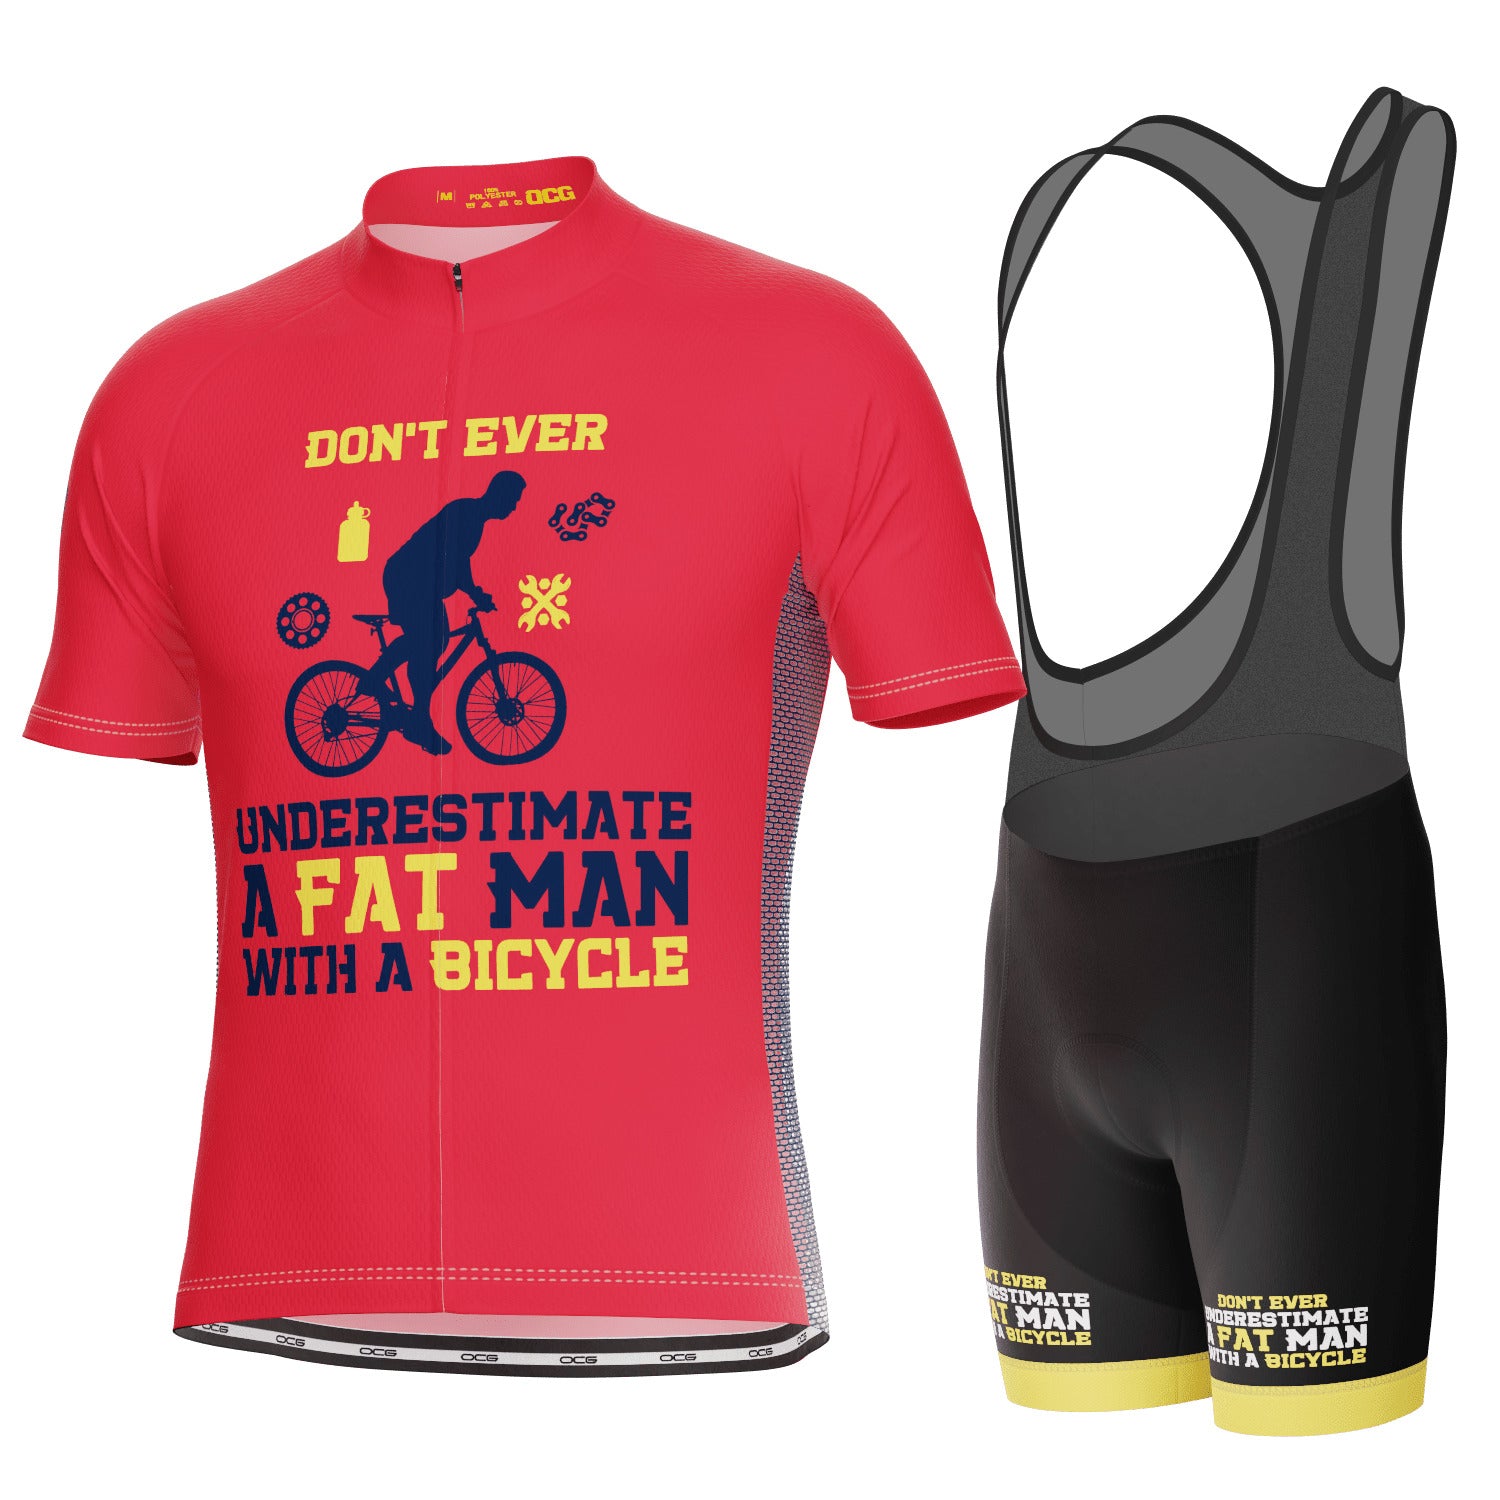 Men's Don't Ever Underestimate a Fat Man 2 Piece Cycling Kit